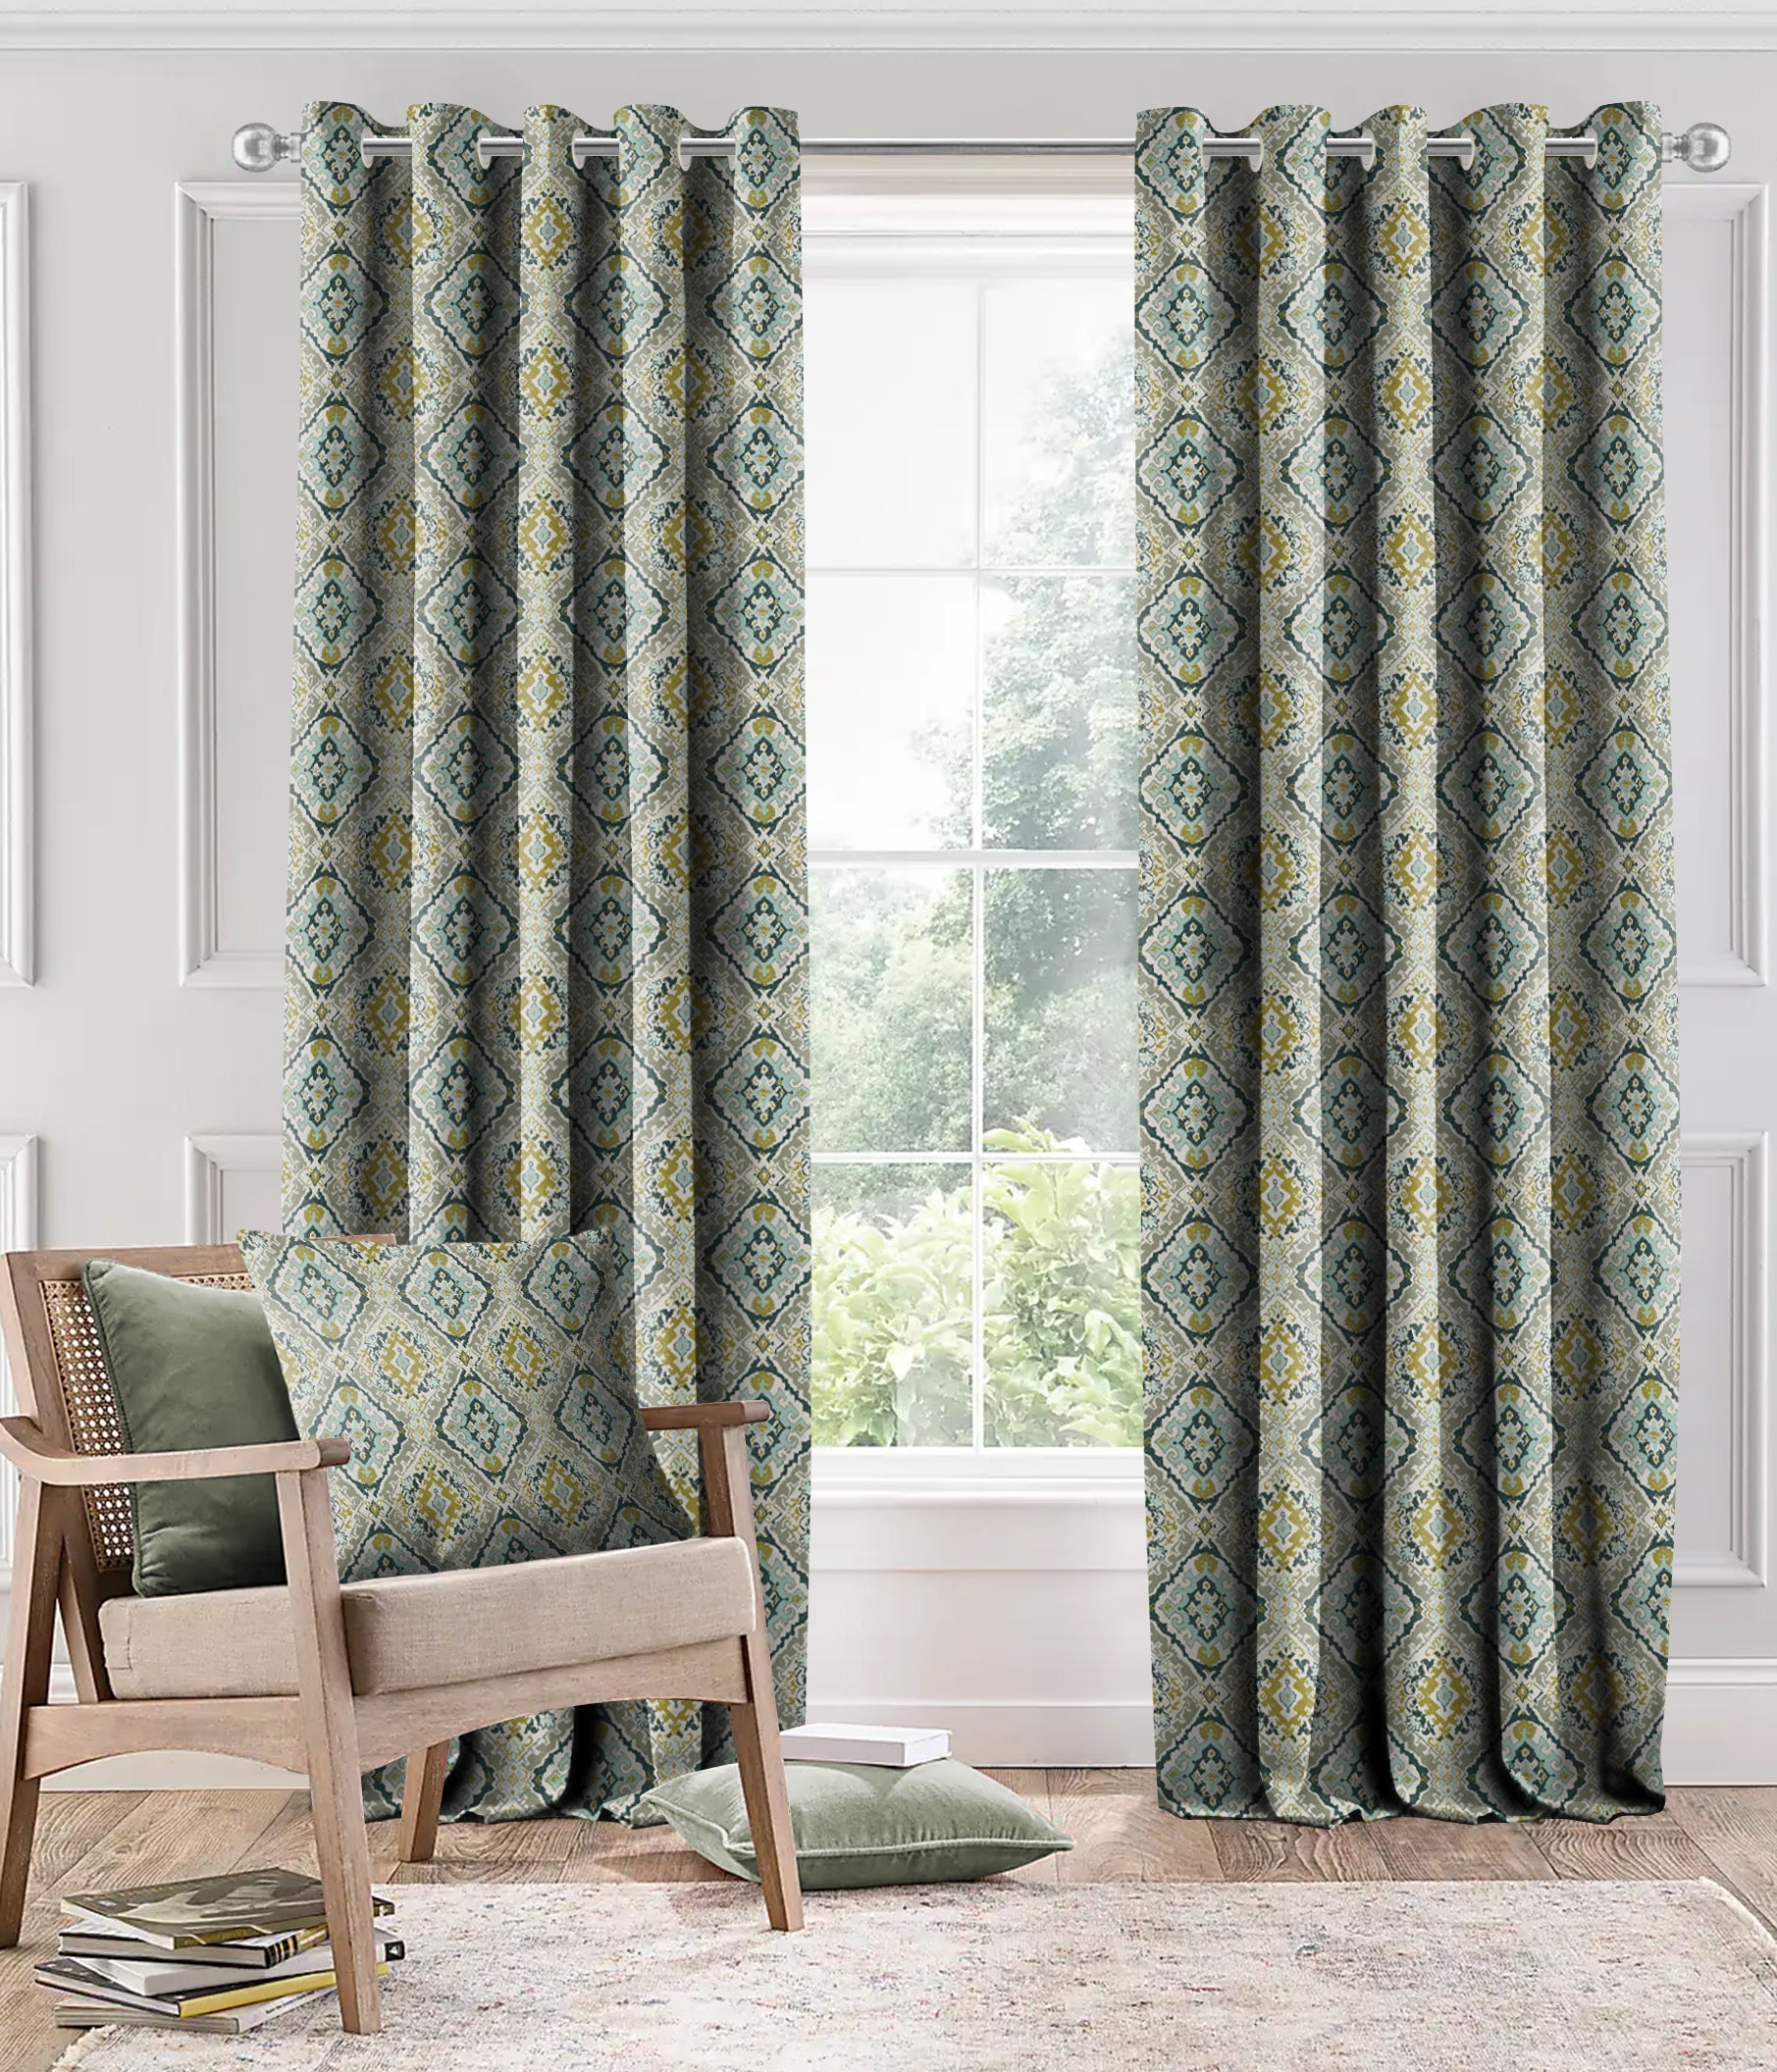 MOROCO ABYSS BLACKOUT CURTAIN